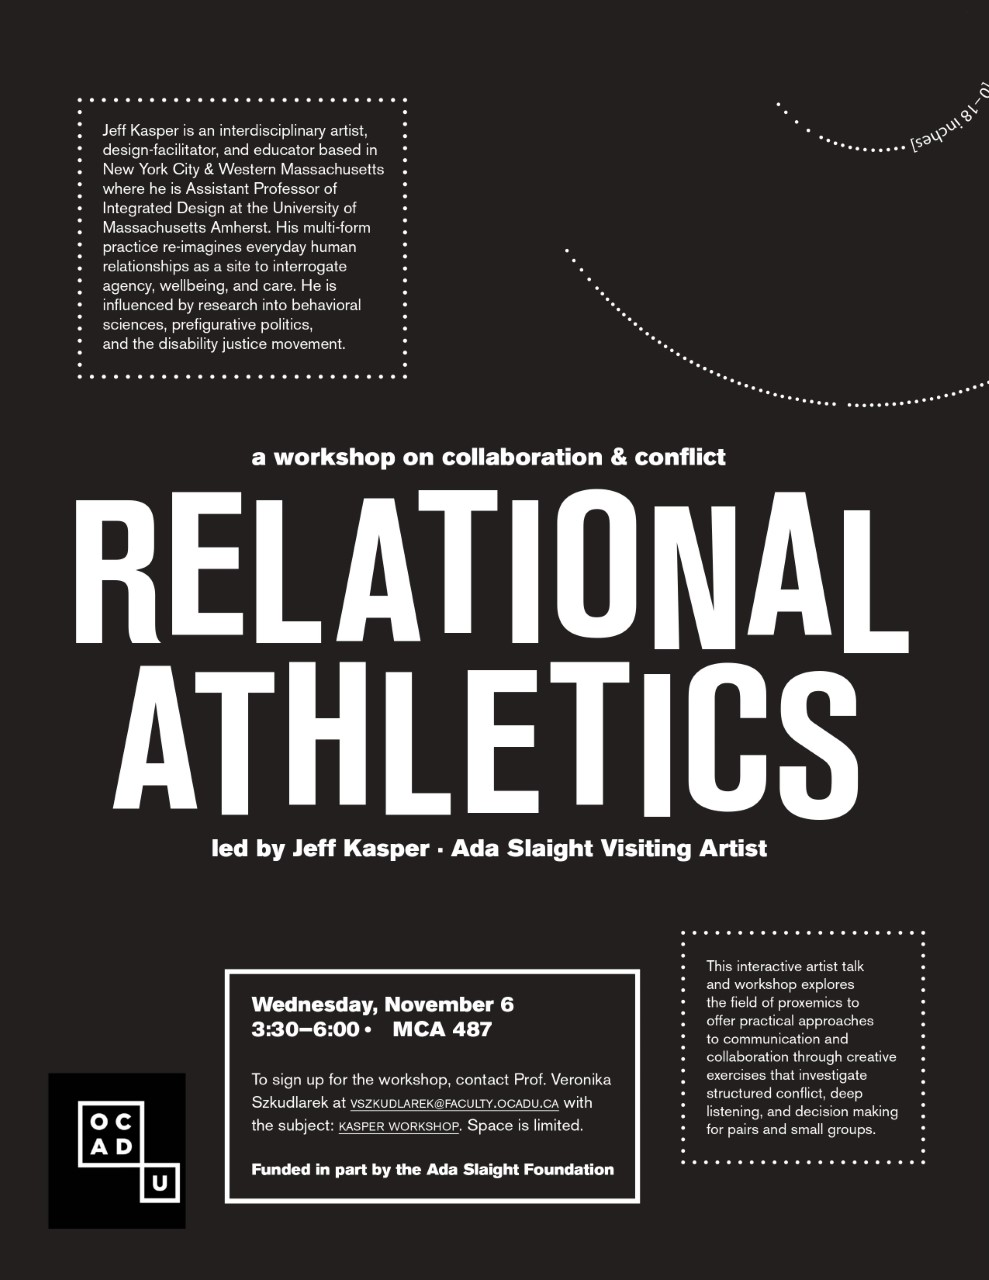 relational athletics poster with event details